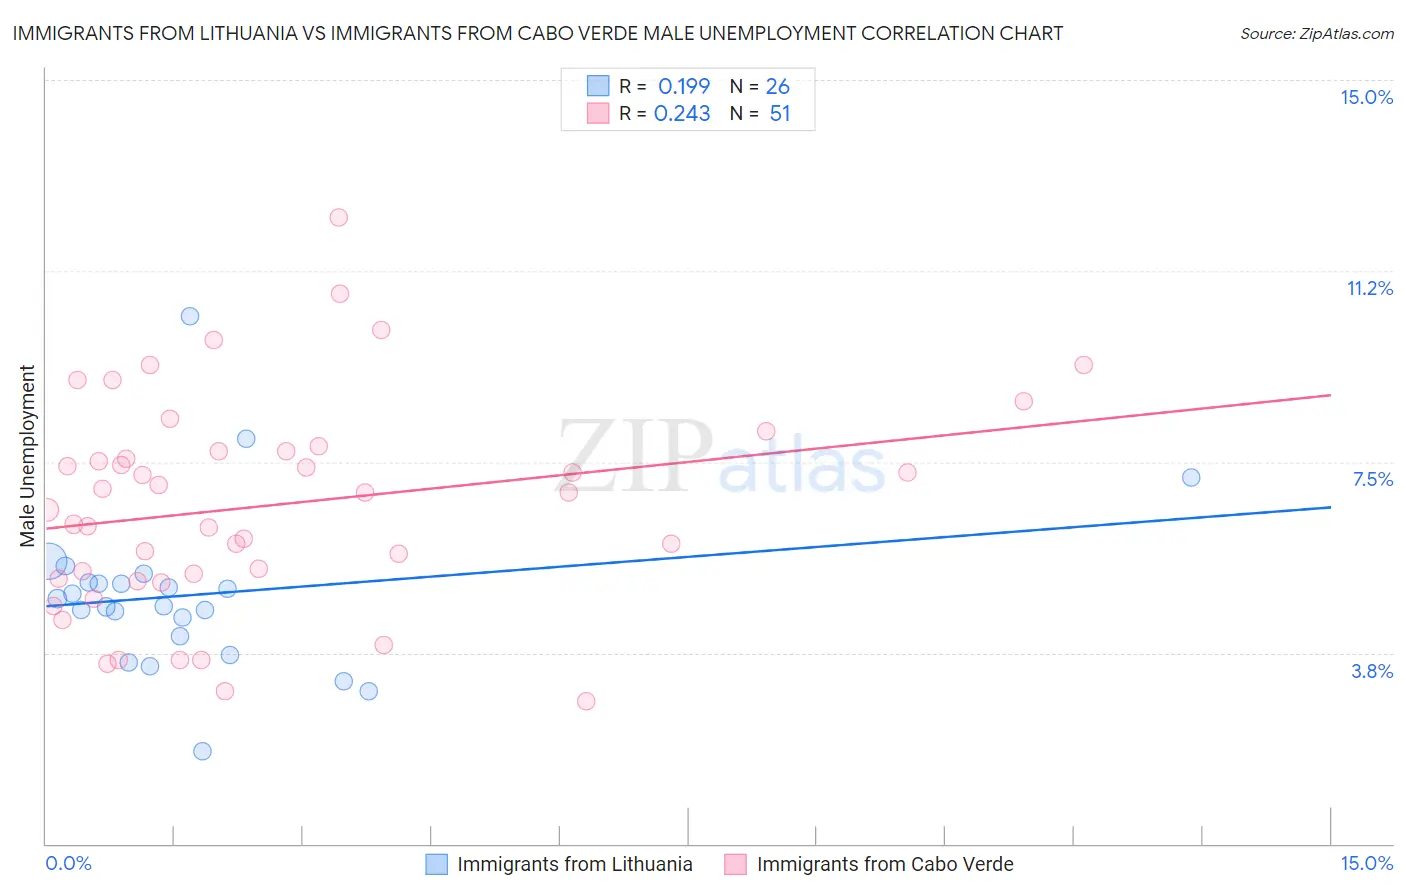 Immigrants from Lithuania vs Immigrants from Cabo Verde Male Unemployment